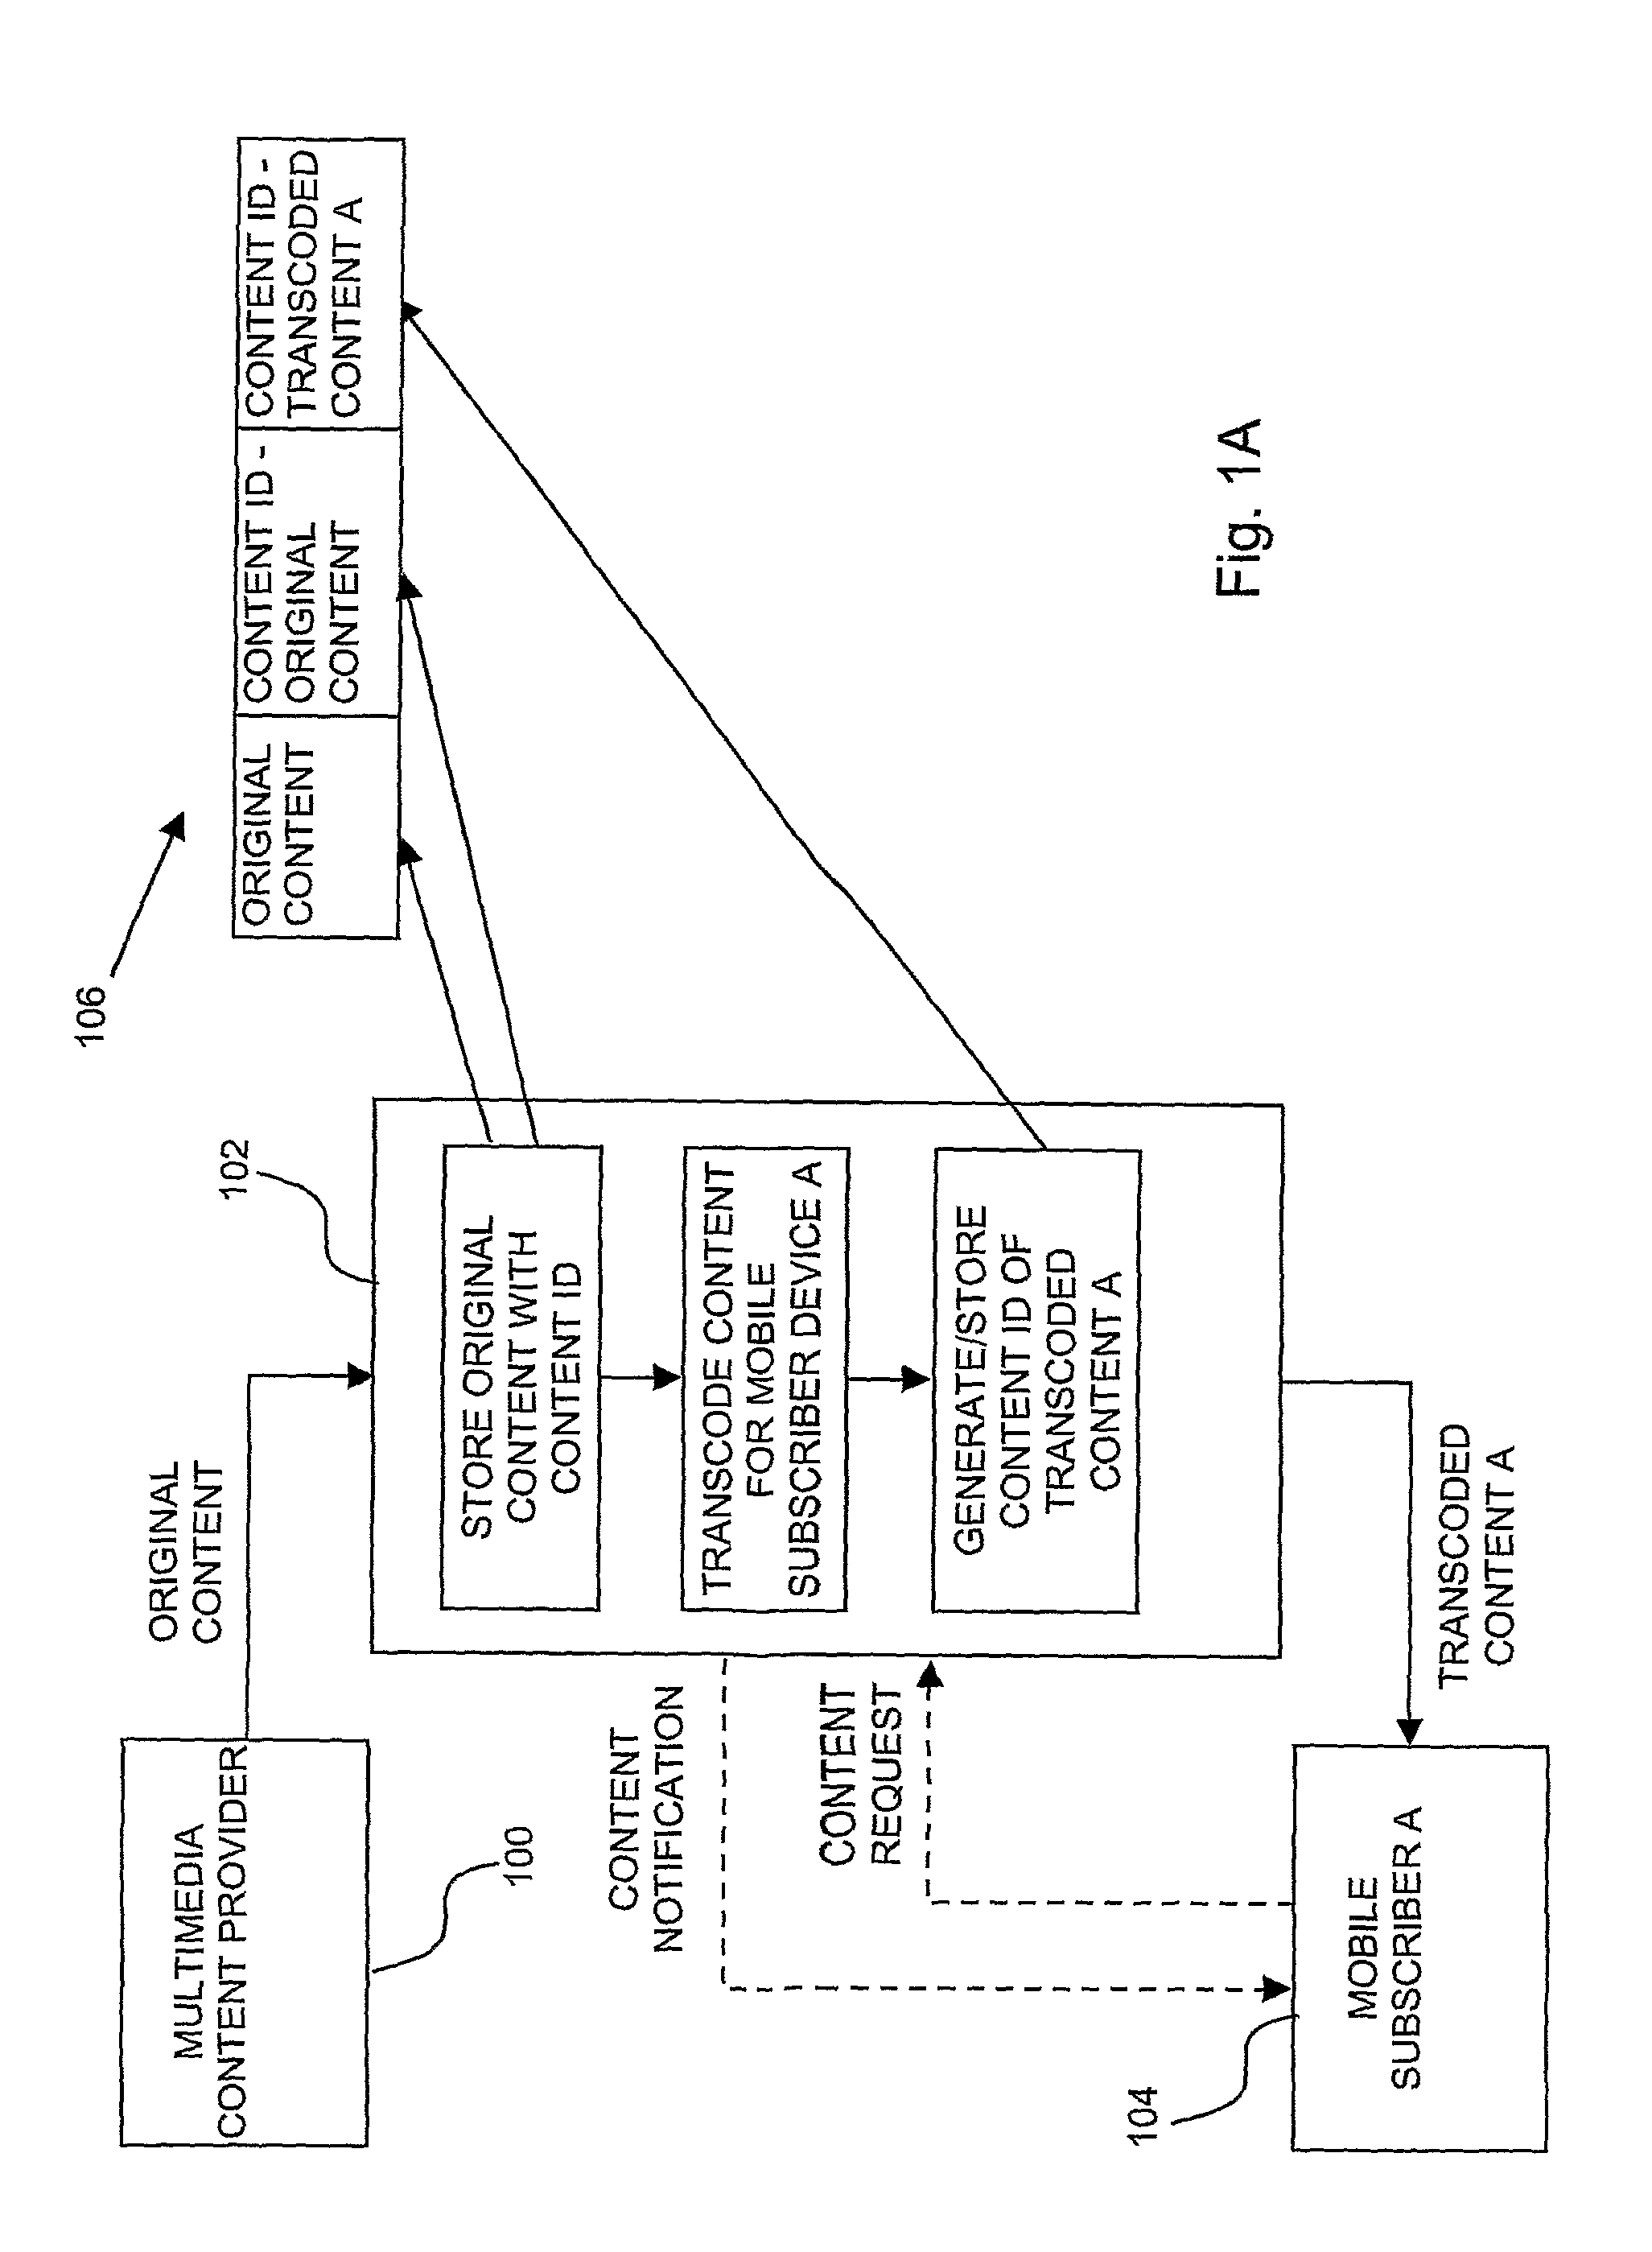 Optimally adapting multimedia content for mobile subscriber device playback